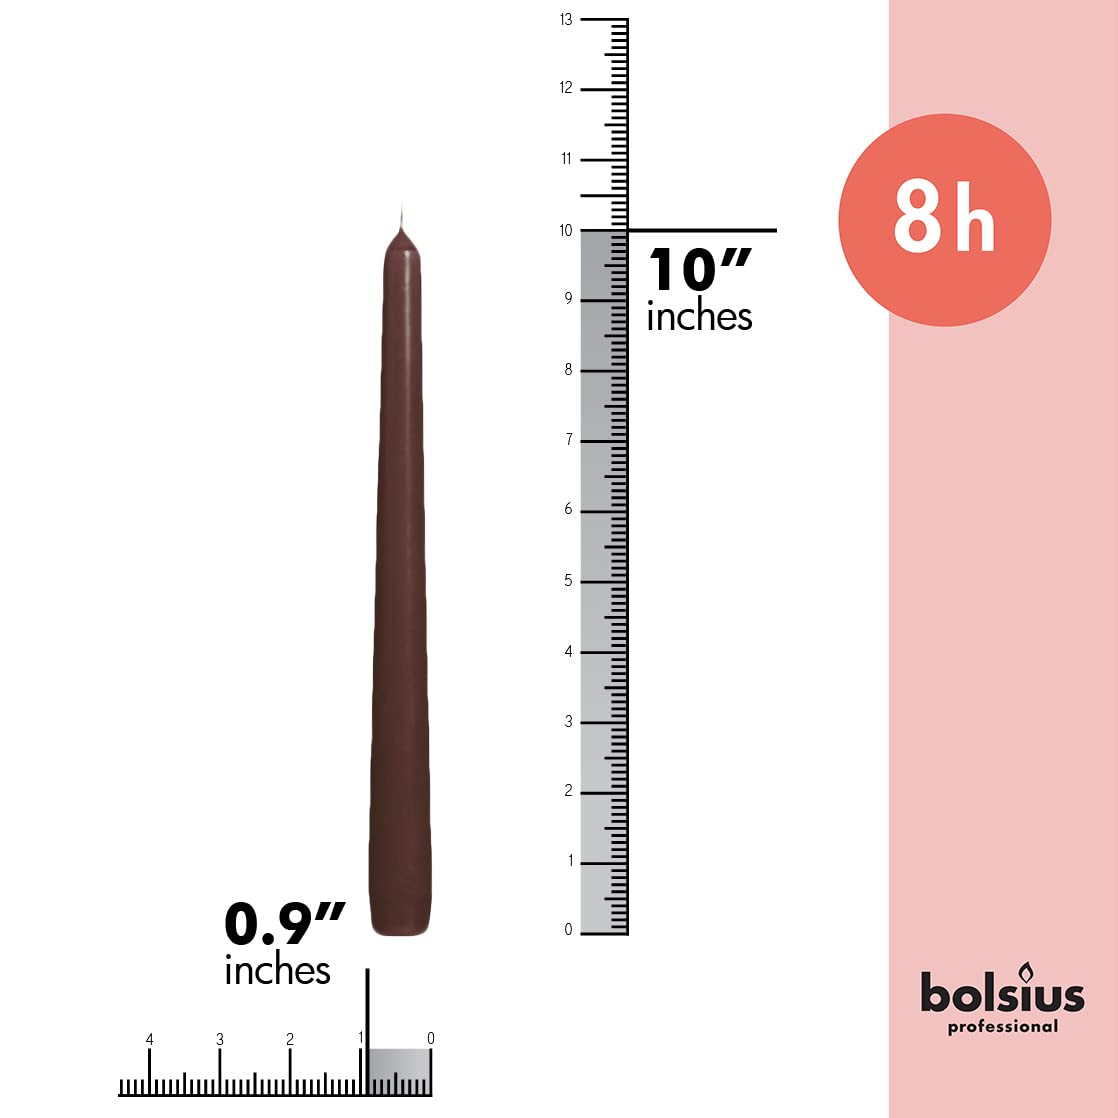 BOLSIUS Maroon Taper Candles - 12 Pack Individually Wrapped Unscented 10 Inch Dinner Candle Set - 8 Burn Hours - Premium European Quality - Smokeless & Dripless Household Wedding & Party Candlesticks  - Like New